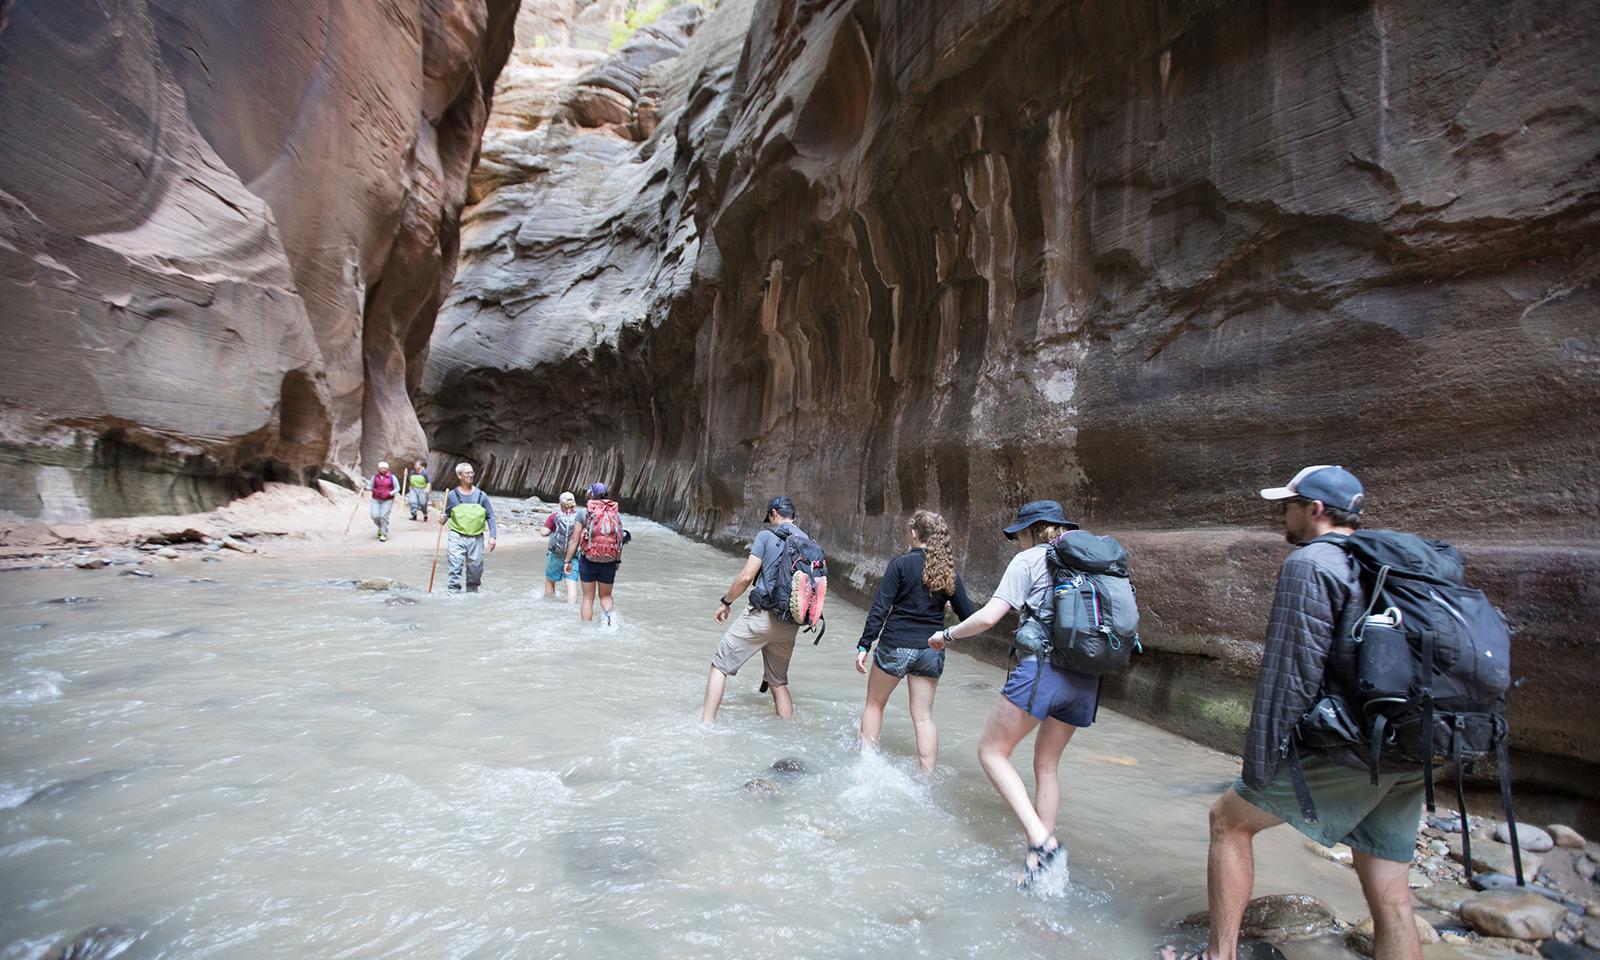 Students in a canyon